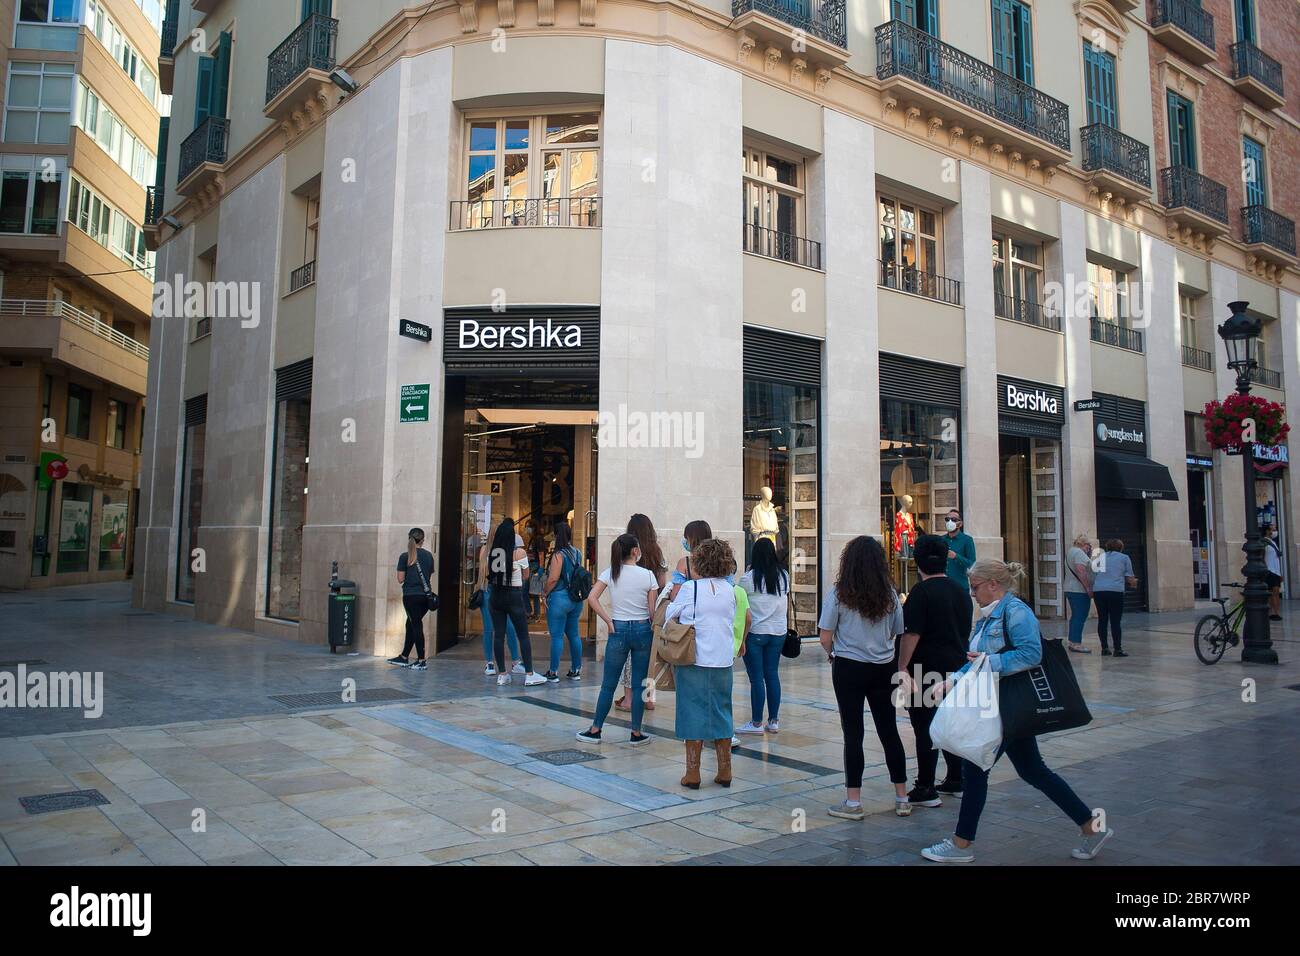 People wait in queue outside 'Bershka' clothing store at Marques de Larios  street during a nationwide partial lockdown. Spain is going through a plan  of down-scaling towards a "new normality" by relaxing